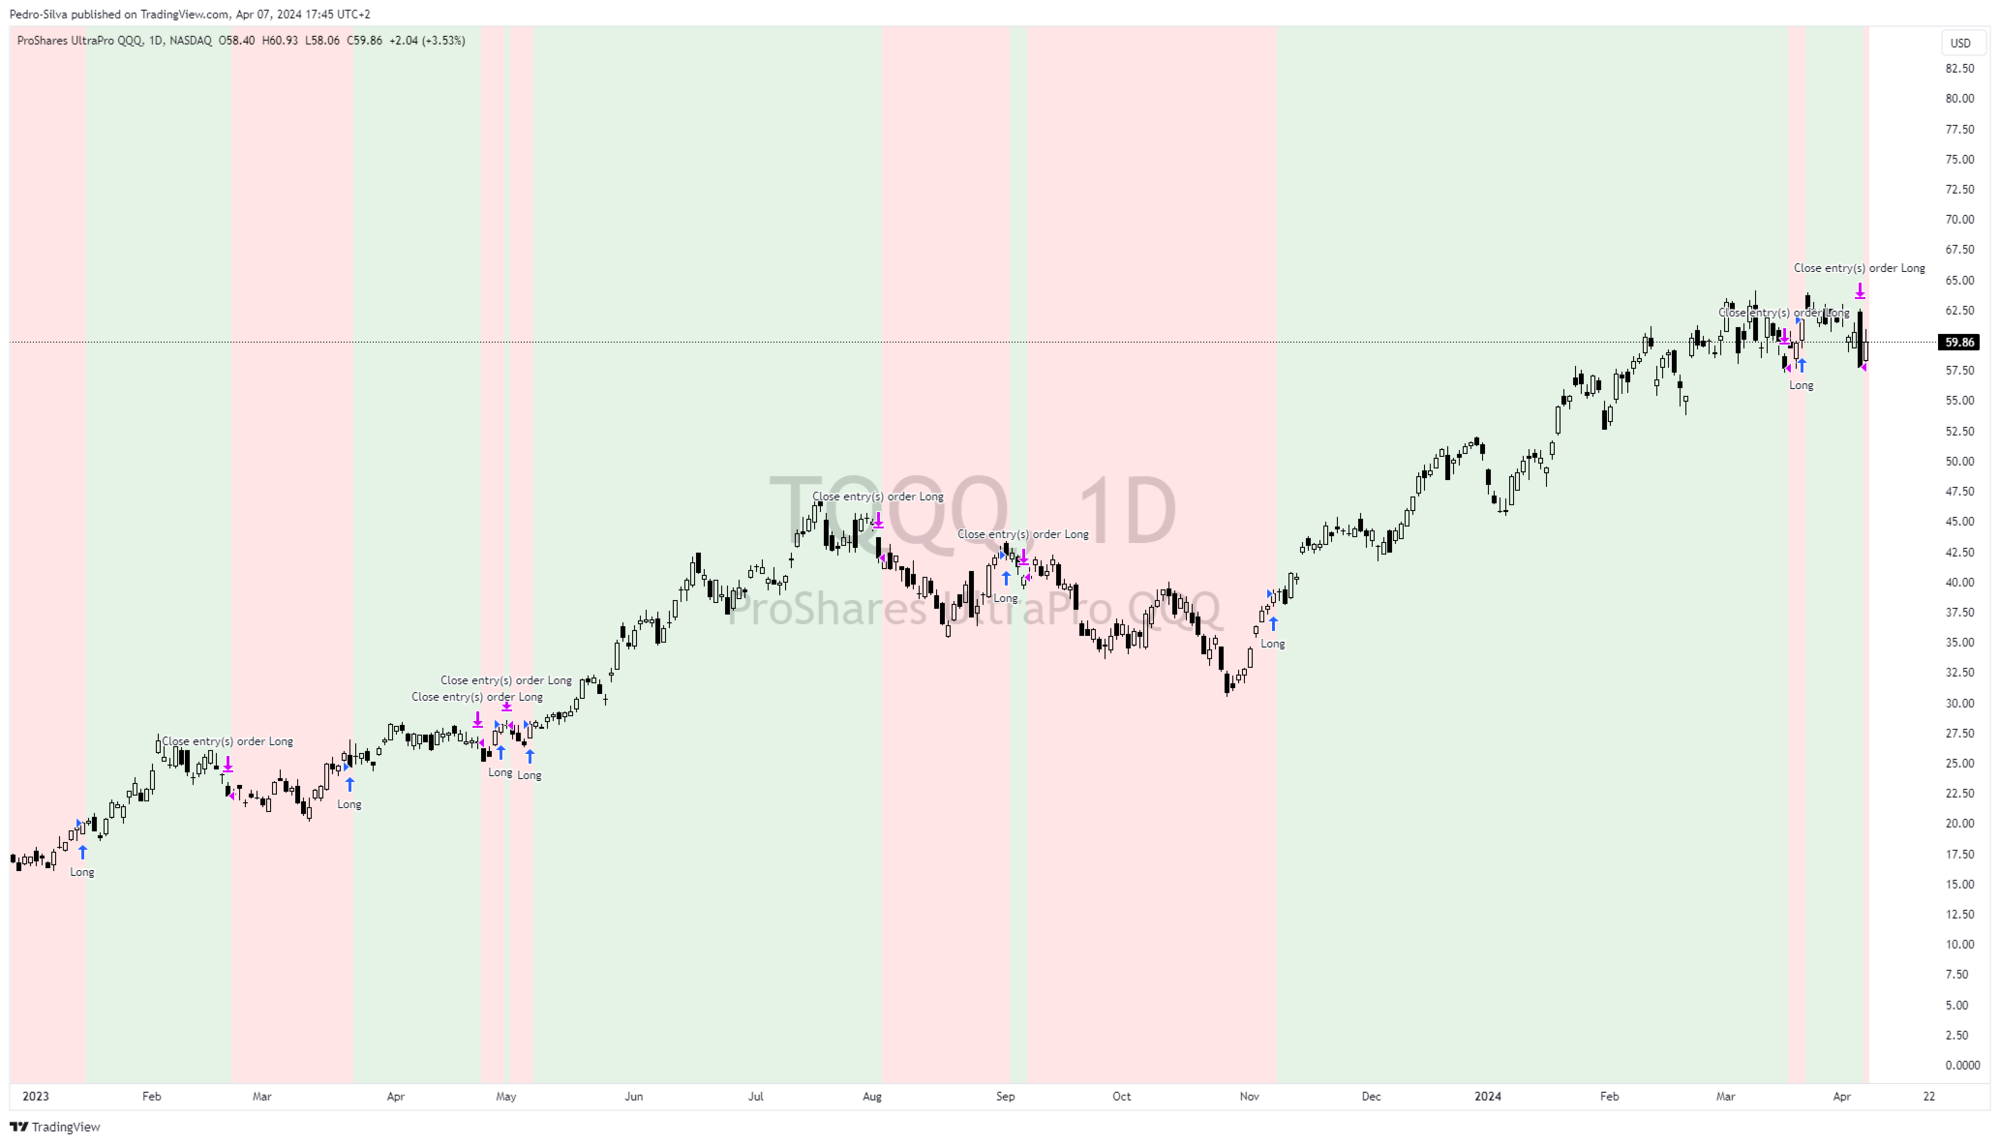 Chart of TQQQ ETF showing a new sell signal on April 4th.